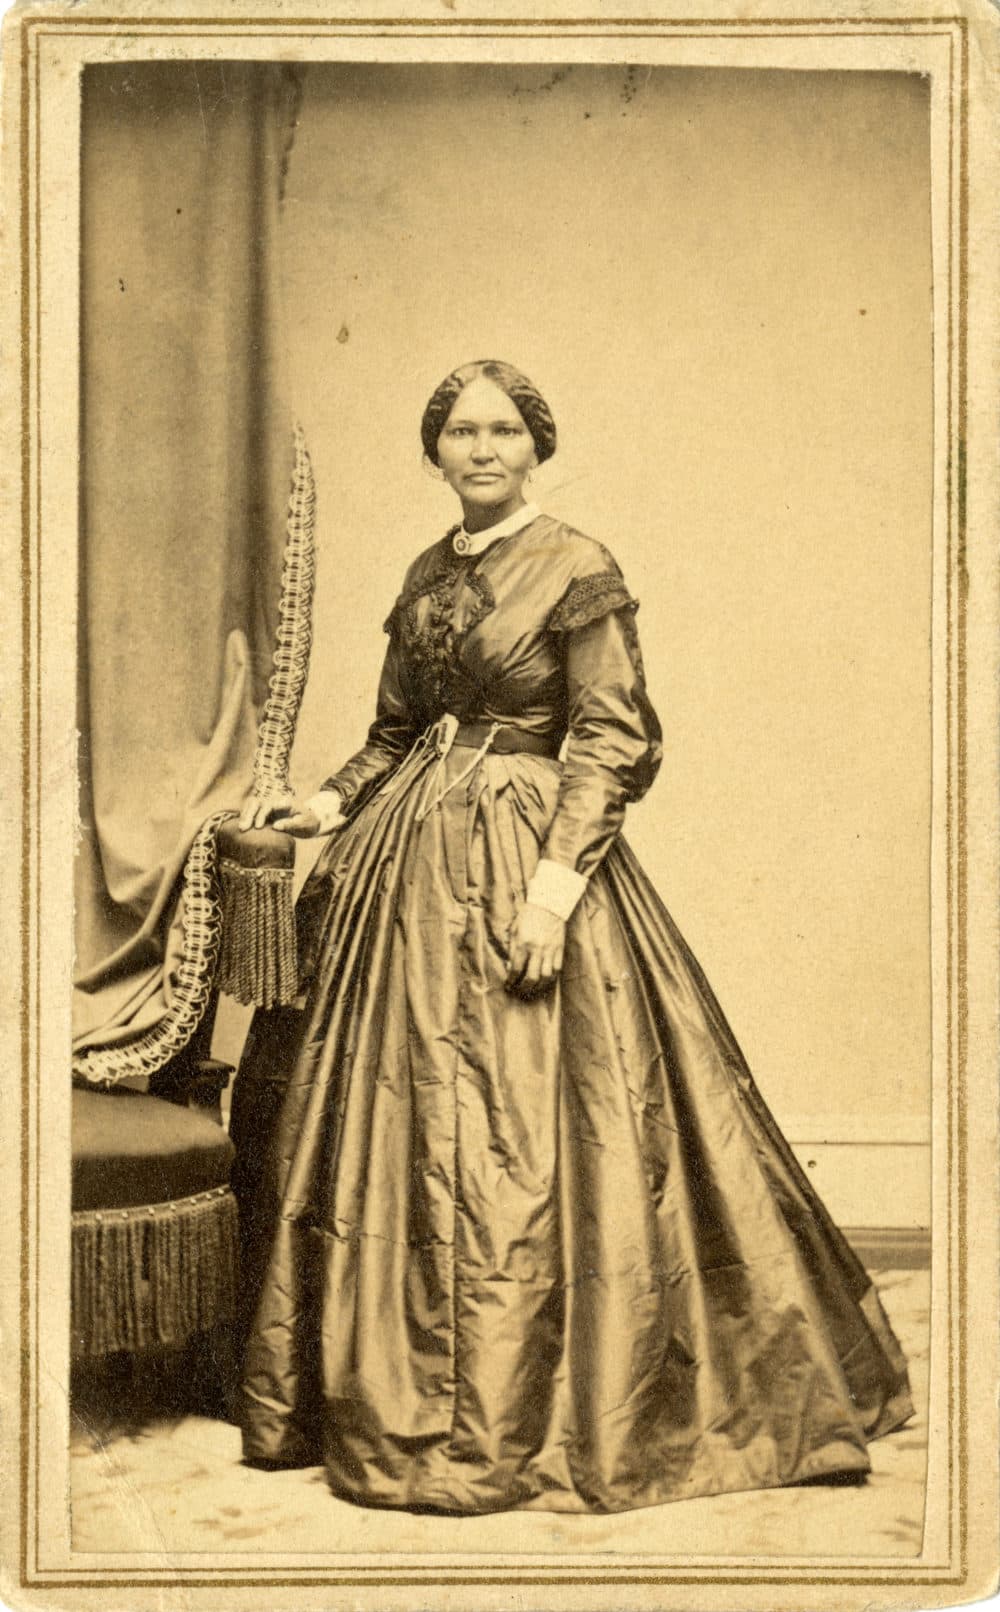 Elizabeth Keckly, pictured c. 1861. (Courtesy Moorland-Spingarn Research Center, Howard University Archives)